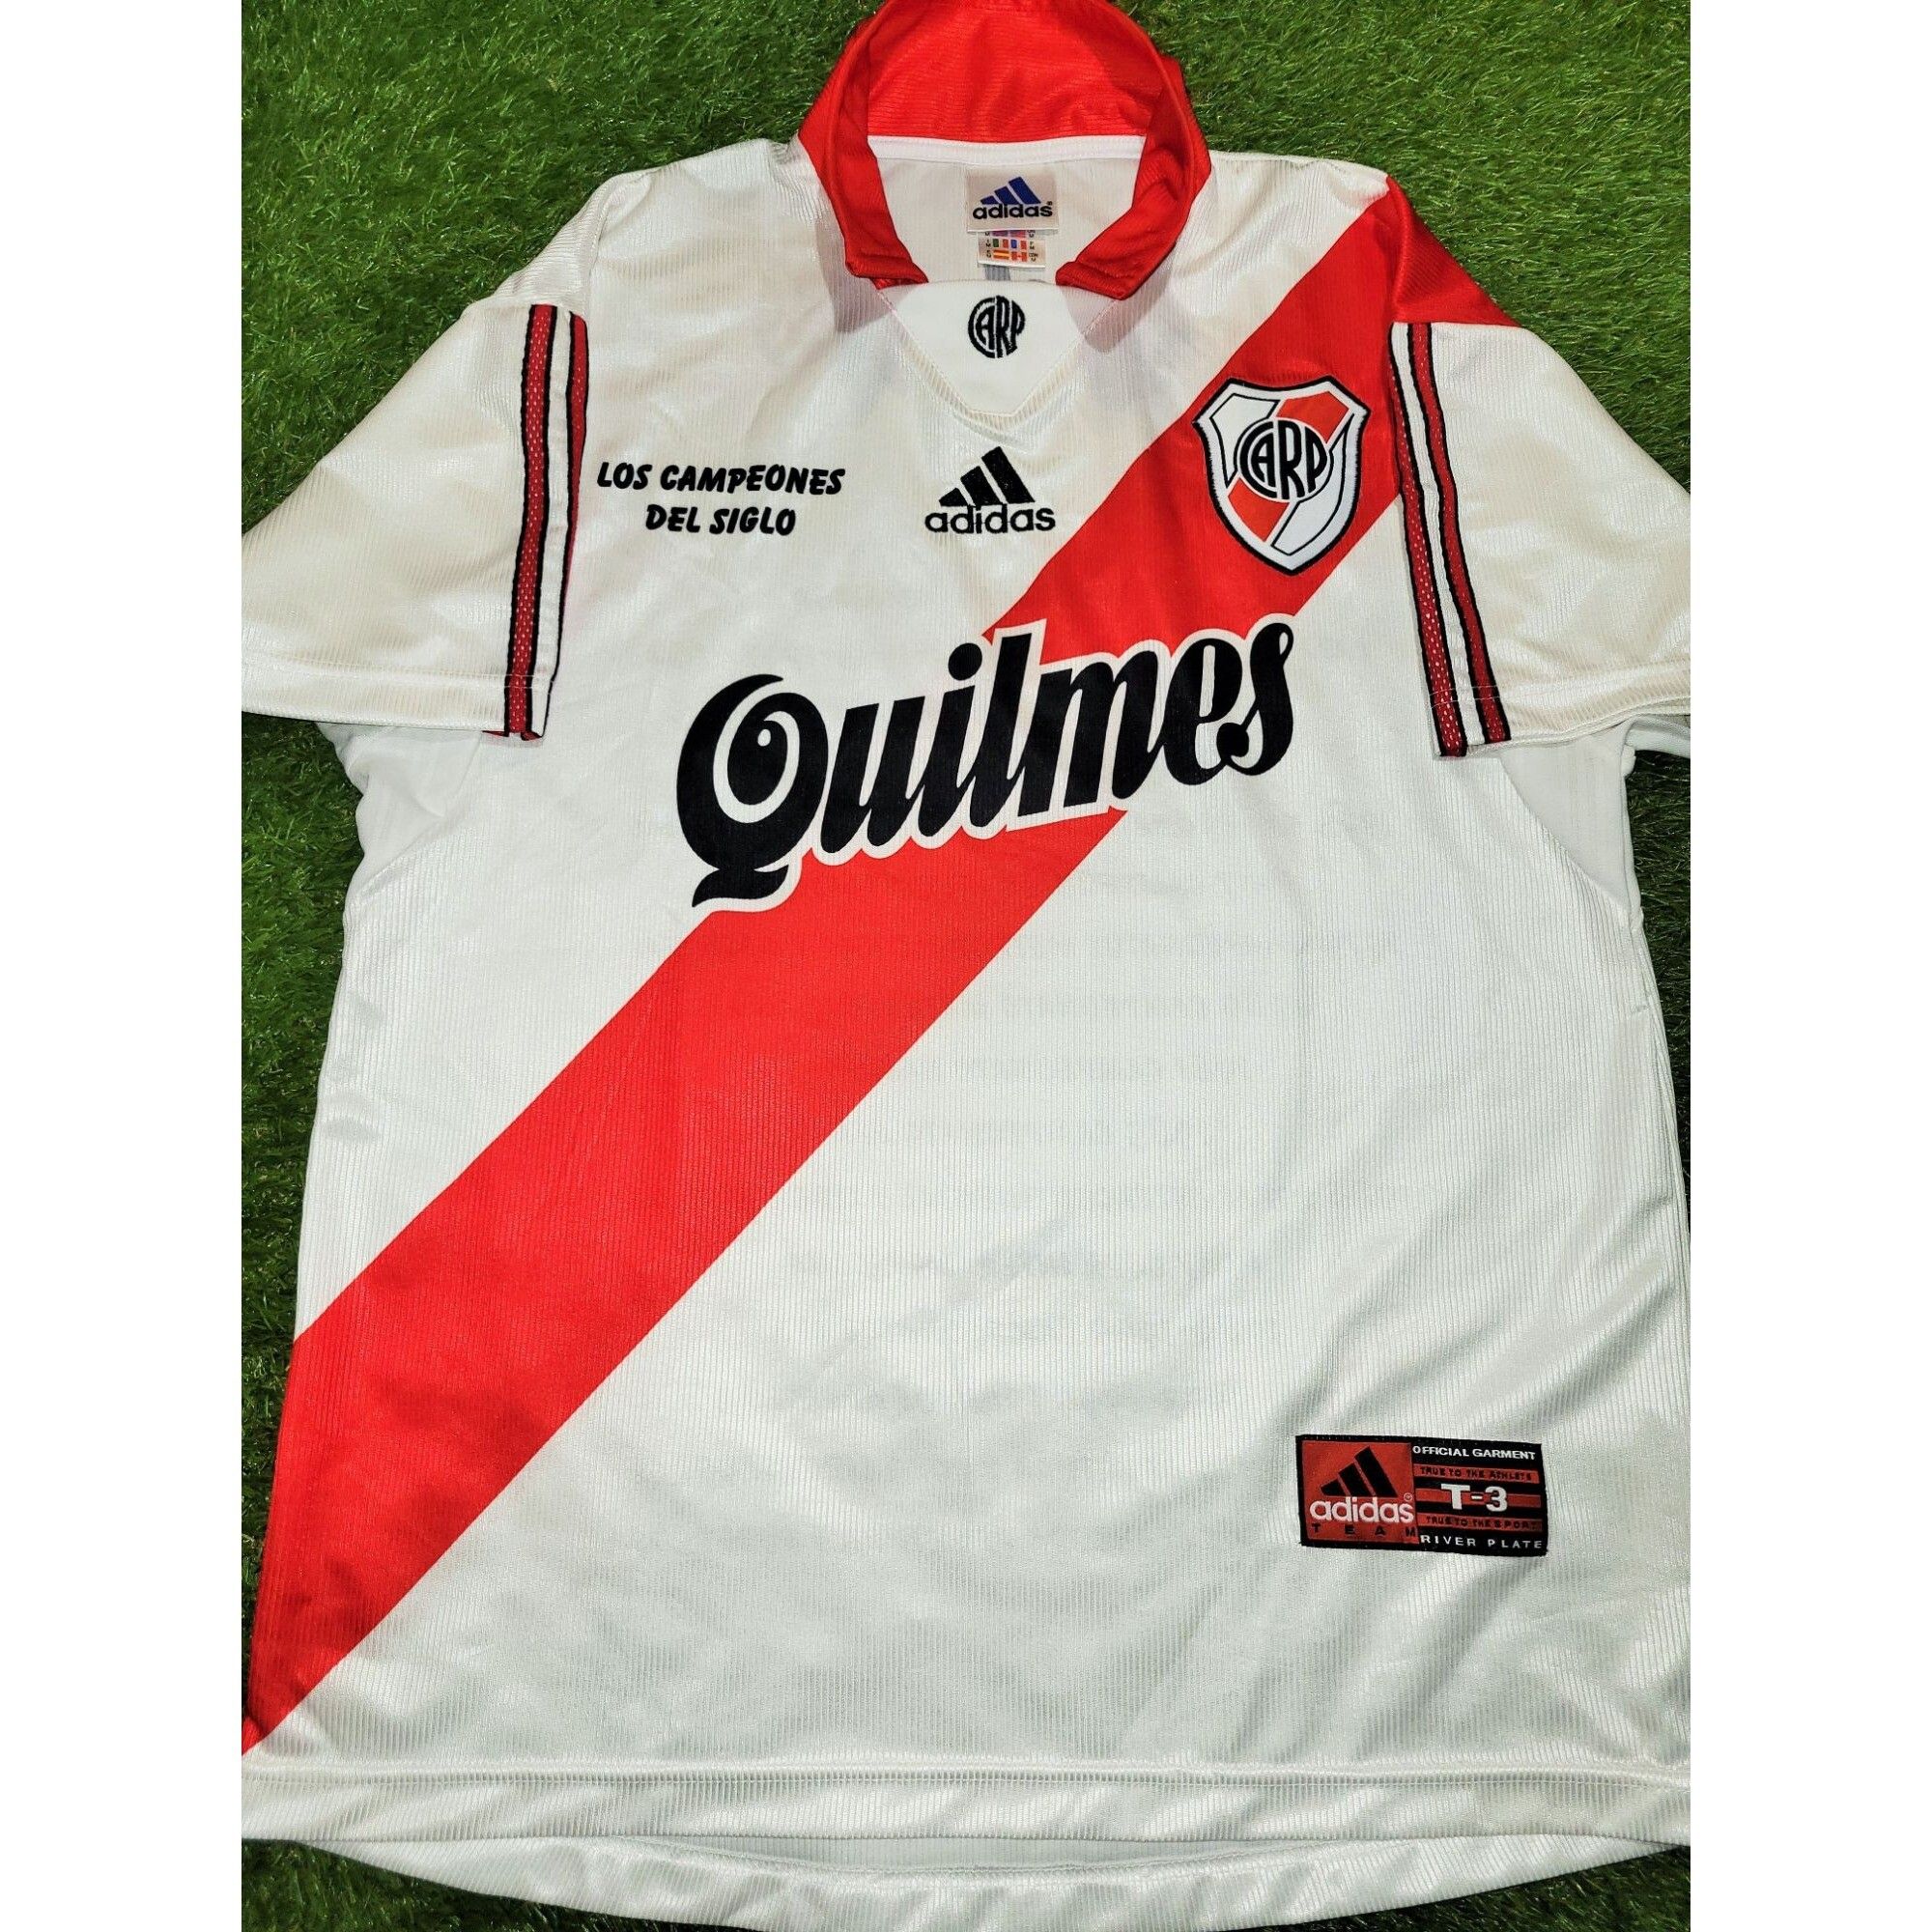 Adidas River Plate Adidas 1998 1999 2000 LTD EDITION Soccer Jersey Size US M / EU 48-50 / 2 - 1 Preview